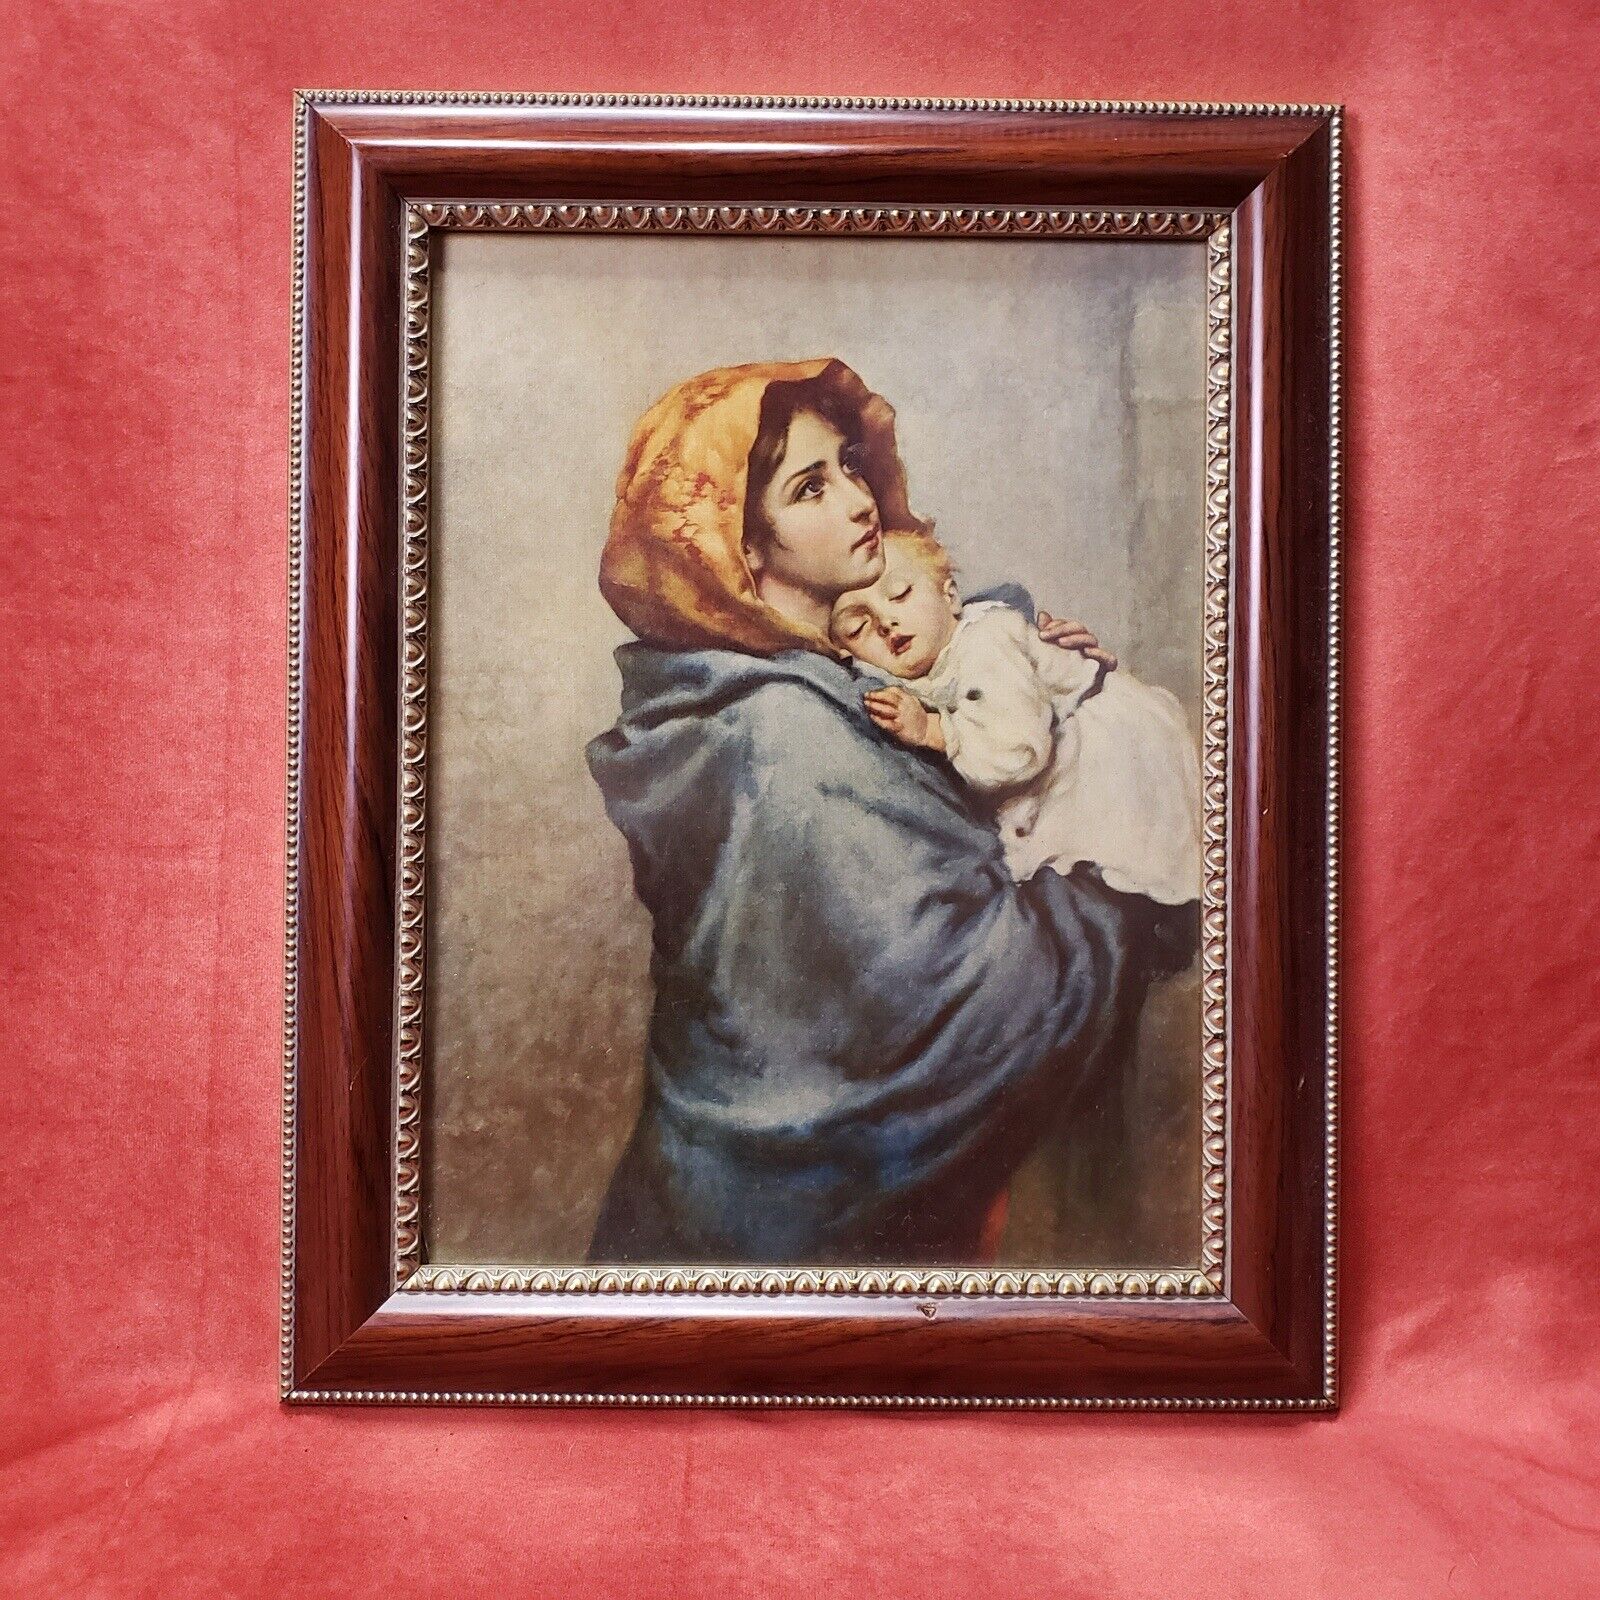 Vintage Madonna of the Streets Roberto Feruzzi print in gold border wooden frame